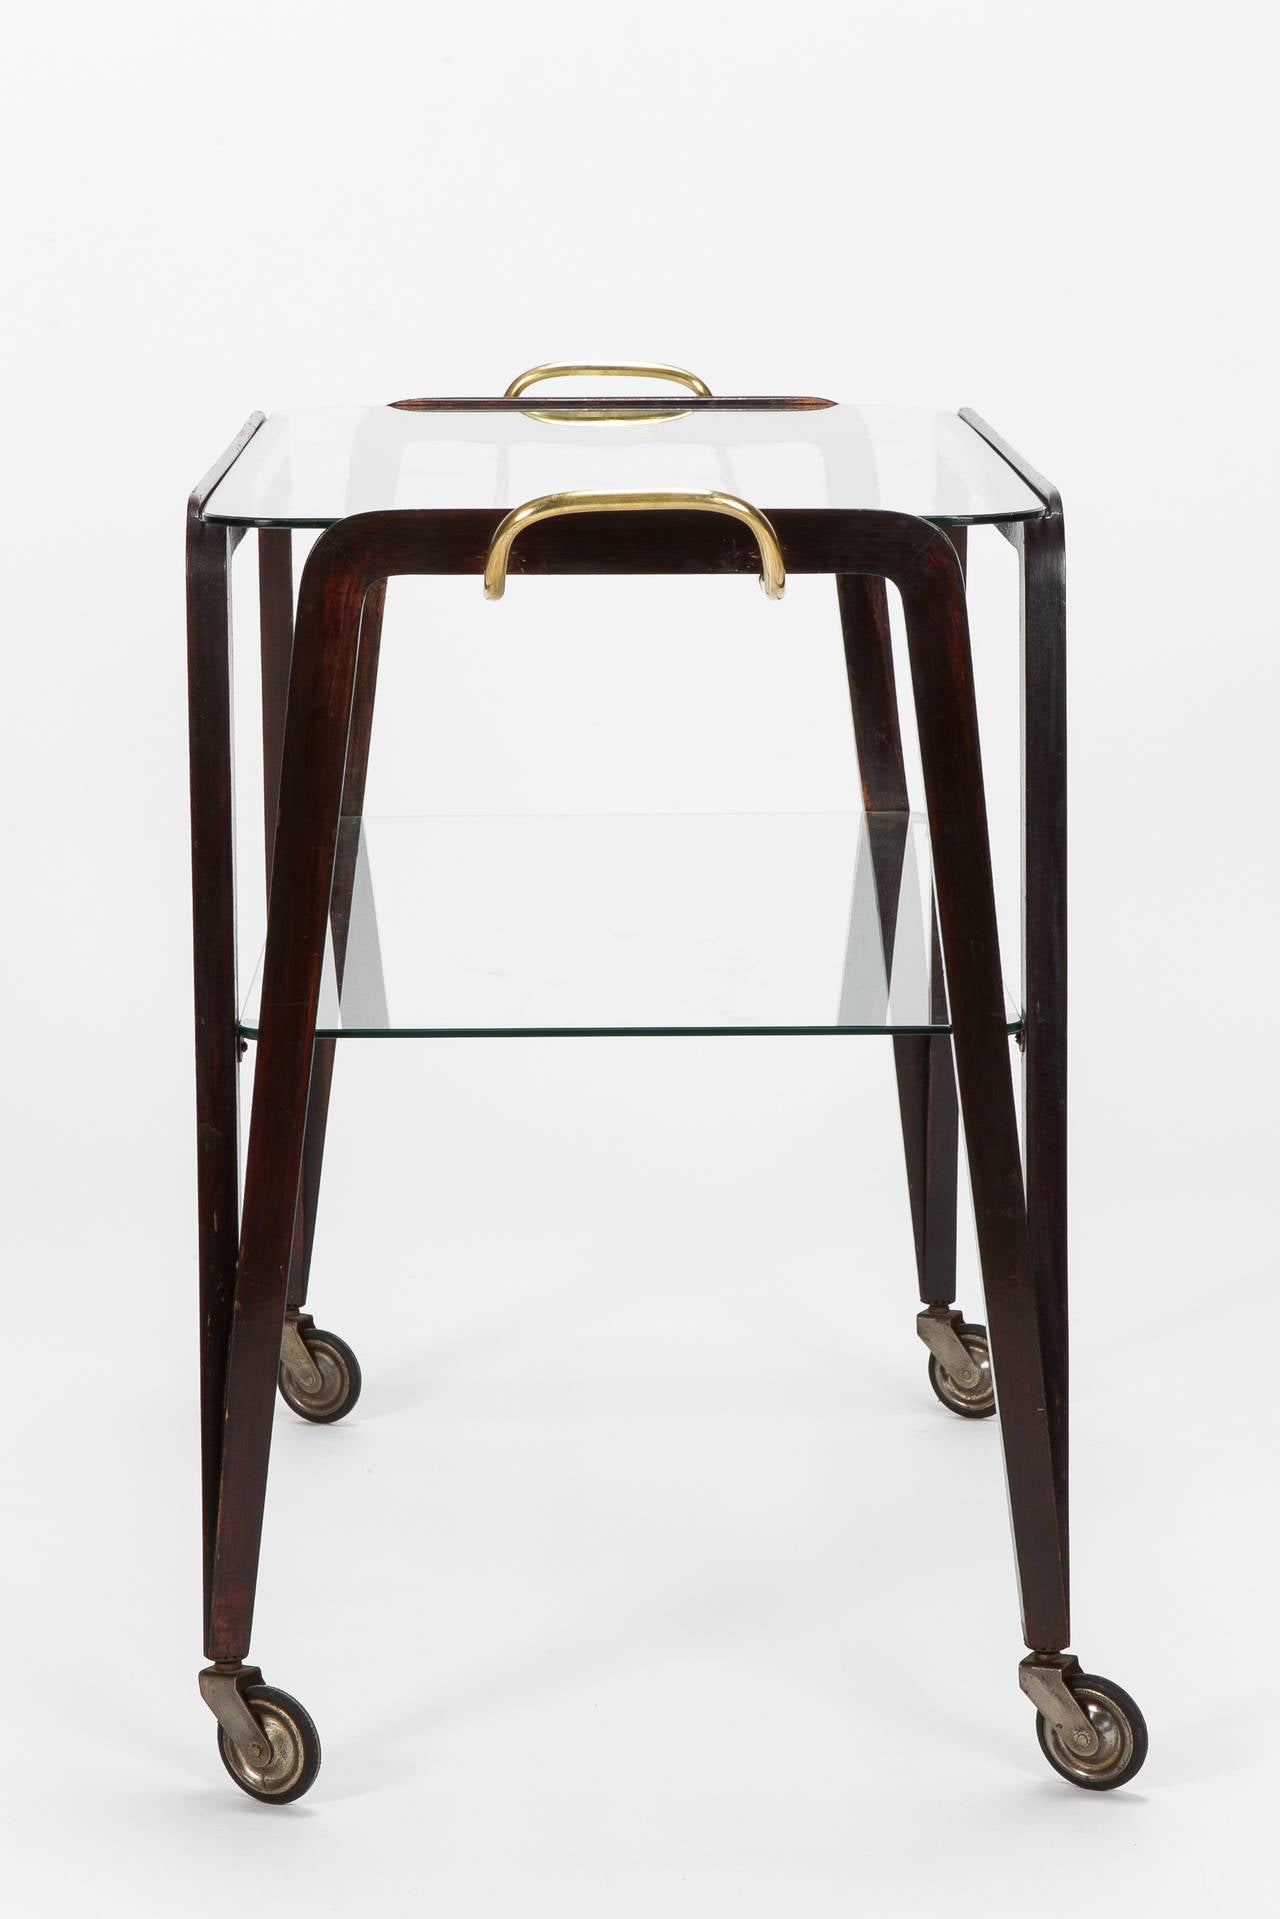 Most stunning bar cart attributed to Ico Parisi, Italy, 1950s. The frame is made of lacquered mahogany, beautiful brass details and glass shelves. Very elegant and sophisticated shape!